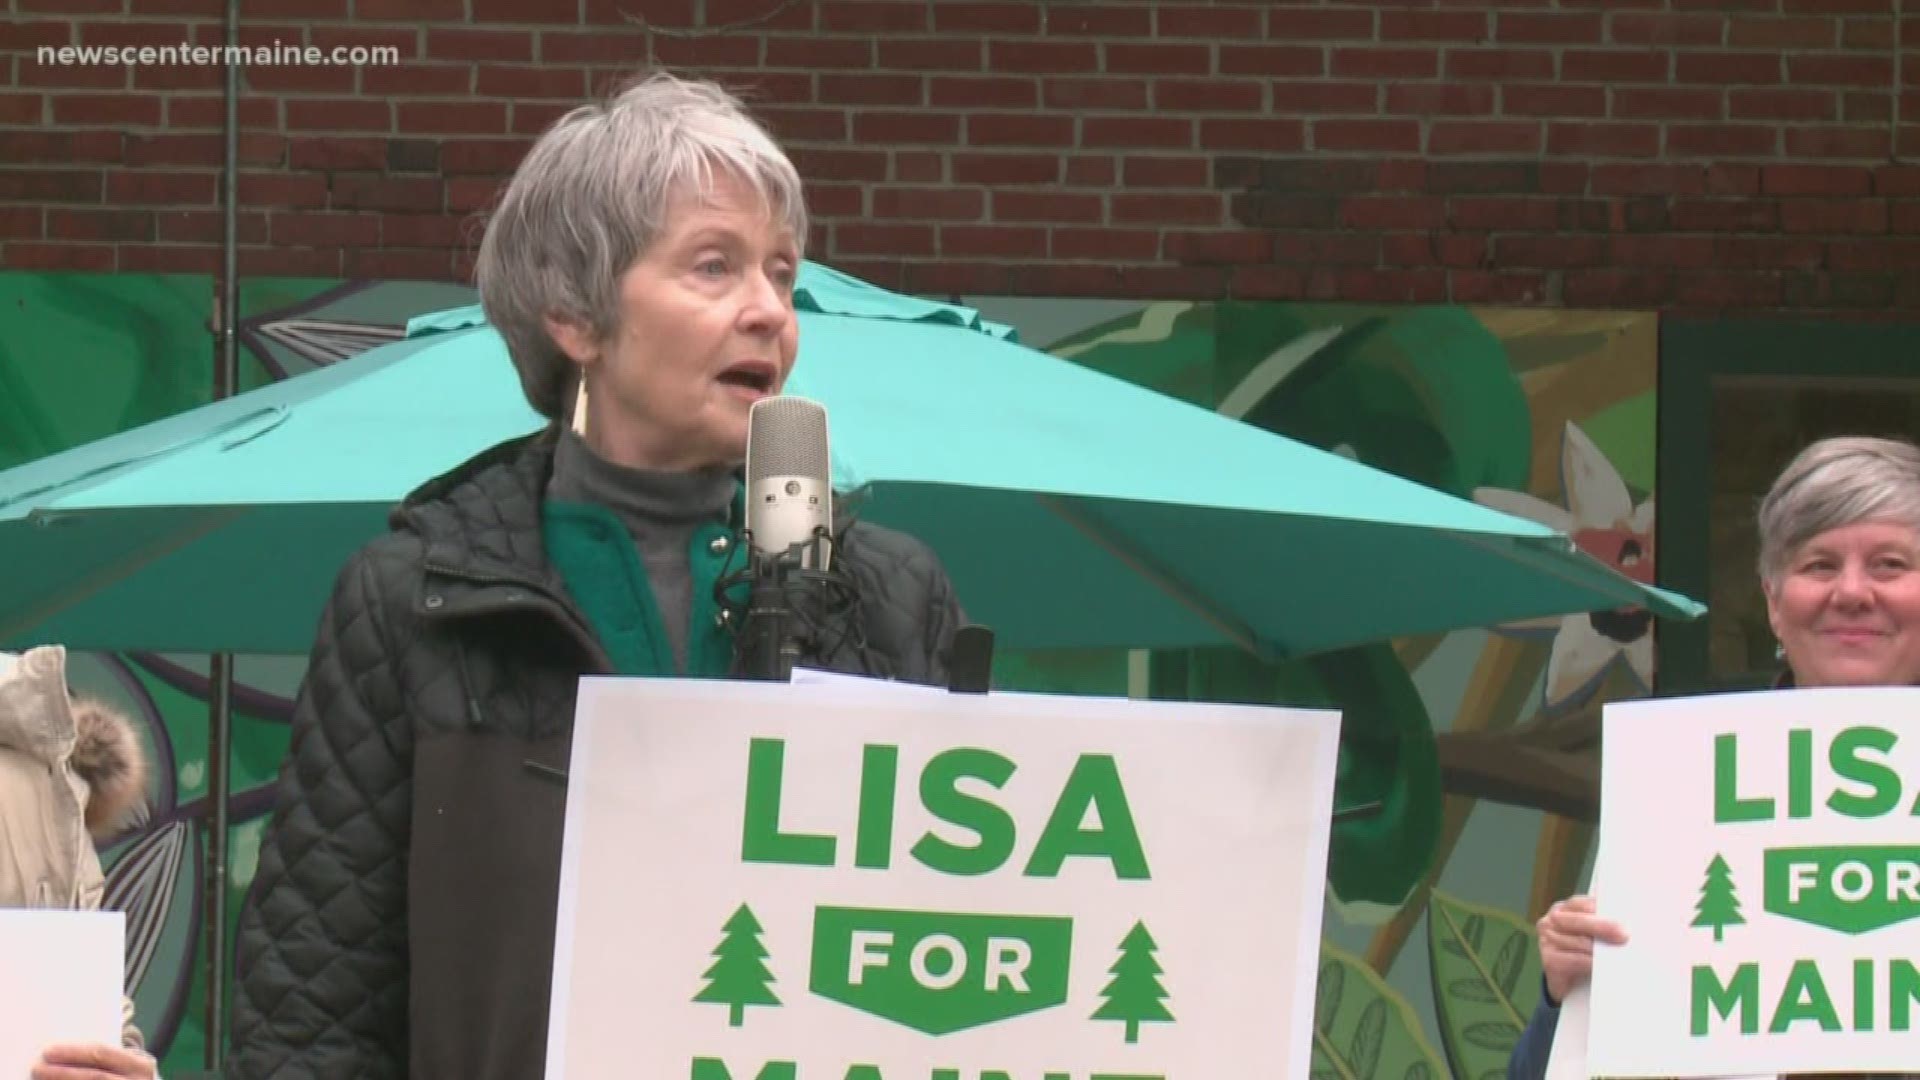 The Maine Green Independent Party finds a standard bearer in Lisa Savage for the 2020 U.S. Senate race against Susan Collins and a field of four Democrats.